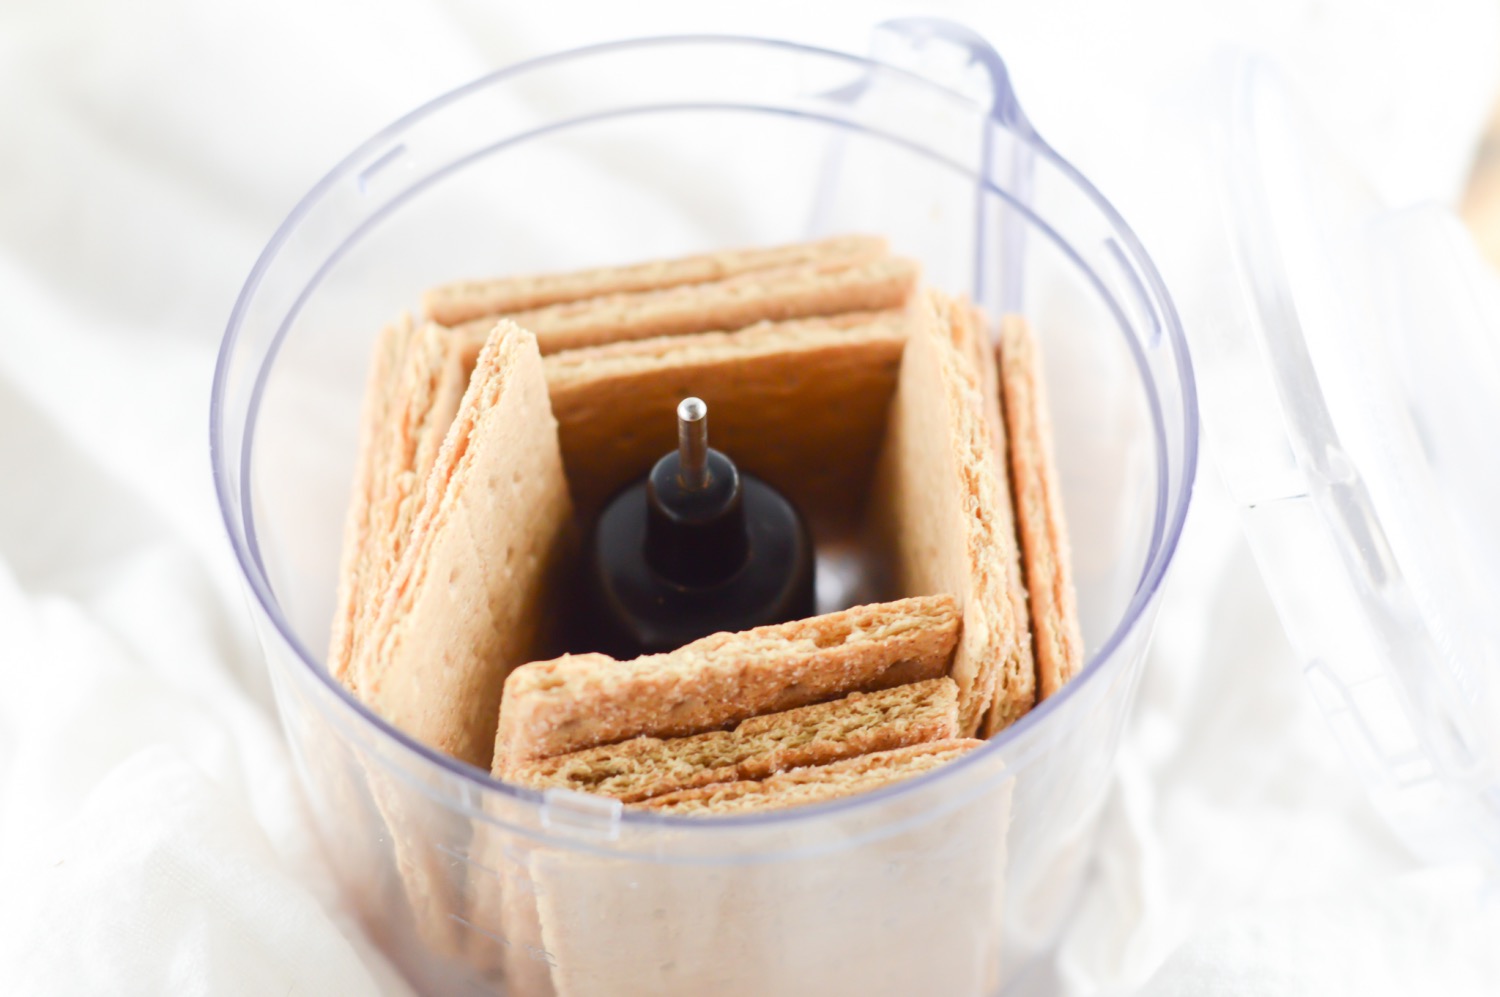 crush the graham crackers in the food processor